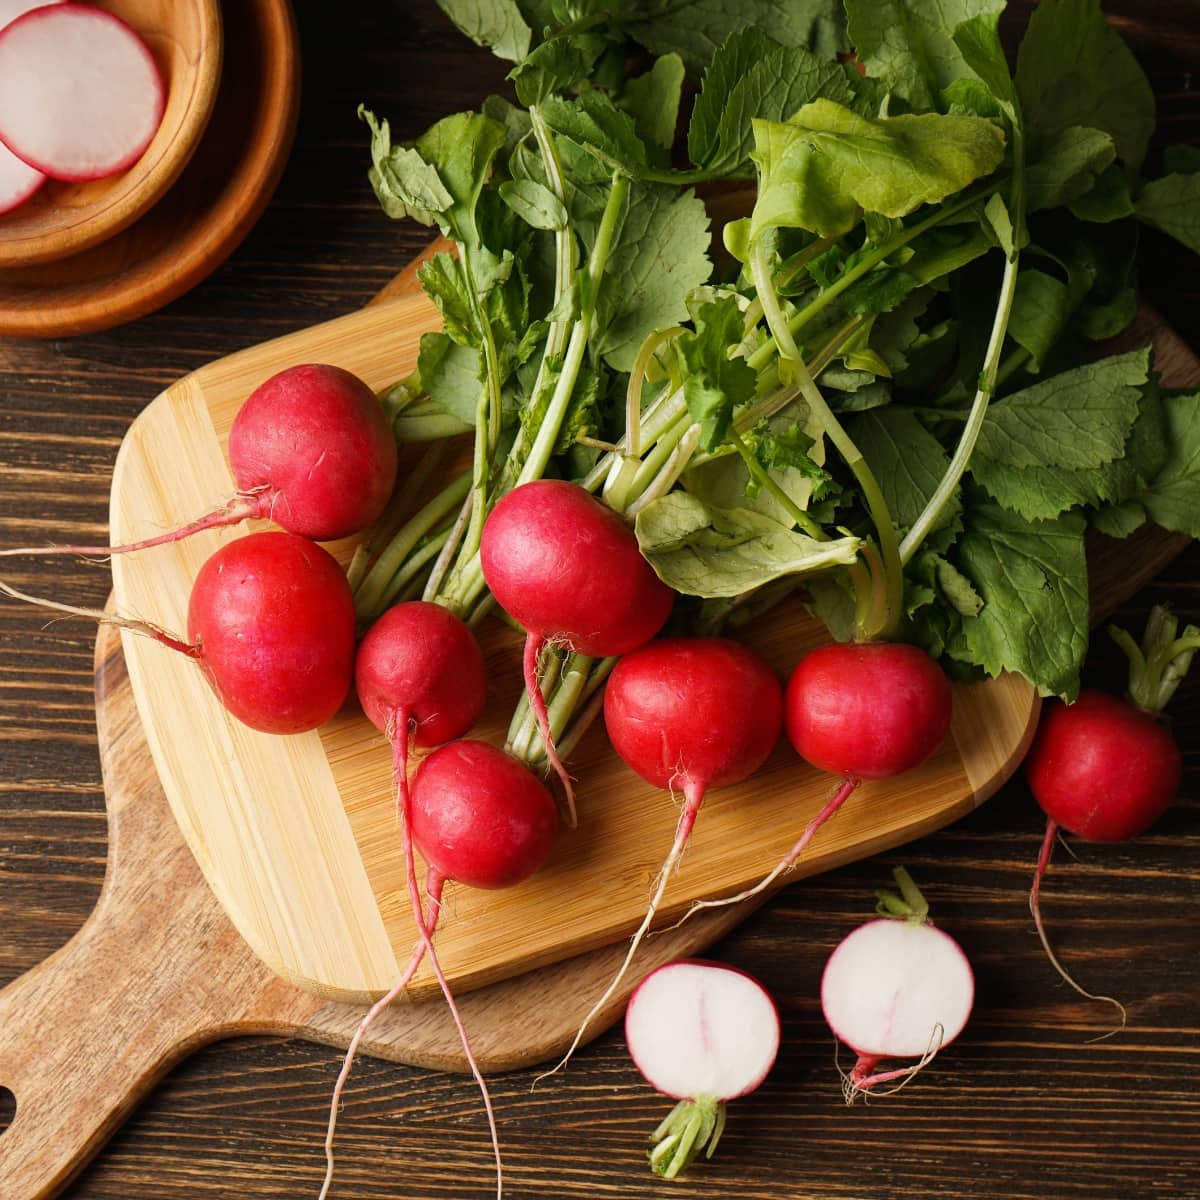 Raw Organic Red Radishes on a Wooden Board